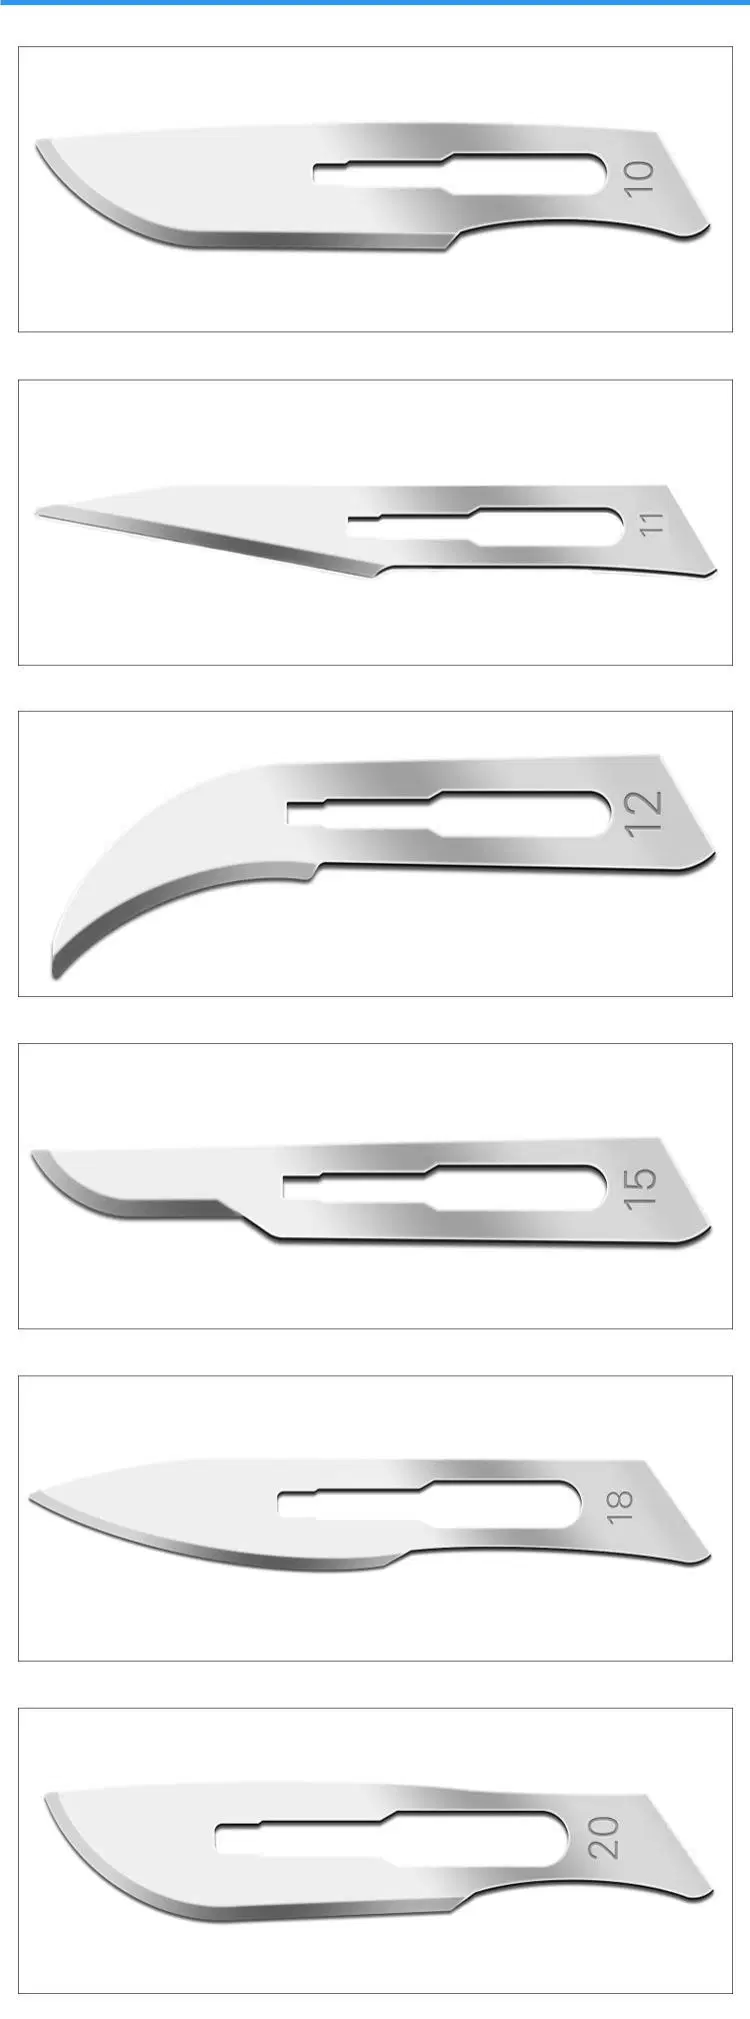 Gamma Ray Sterilized Carbon Steel or Stainless Steel Surgical Scalpel Blade